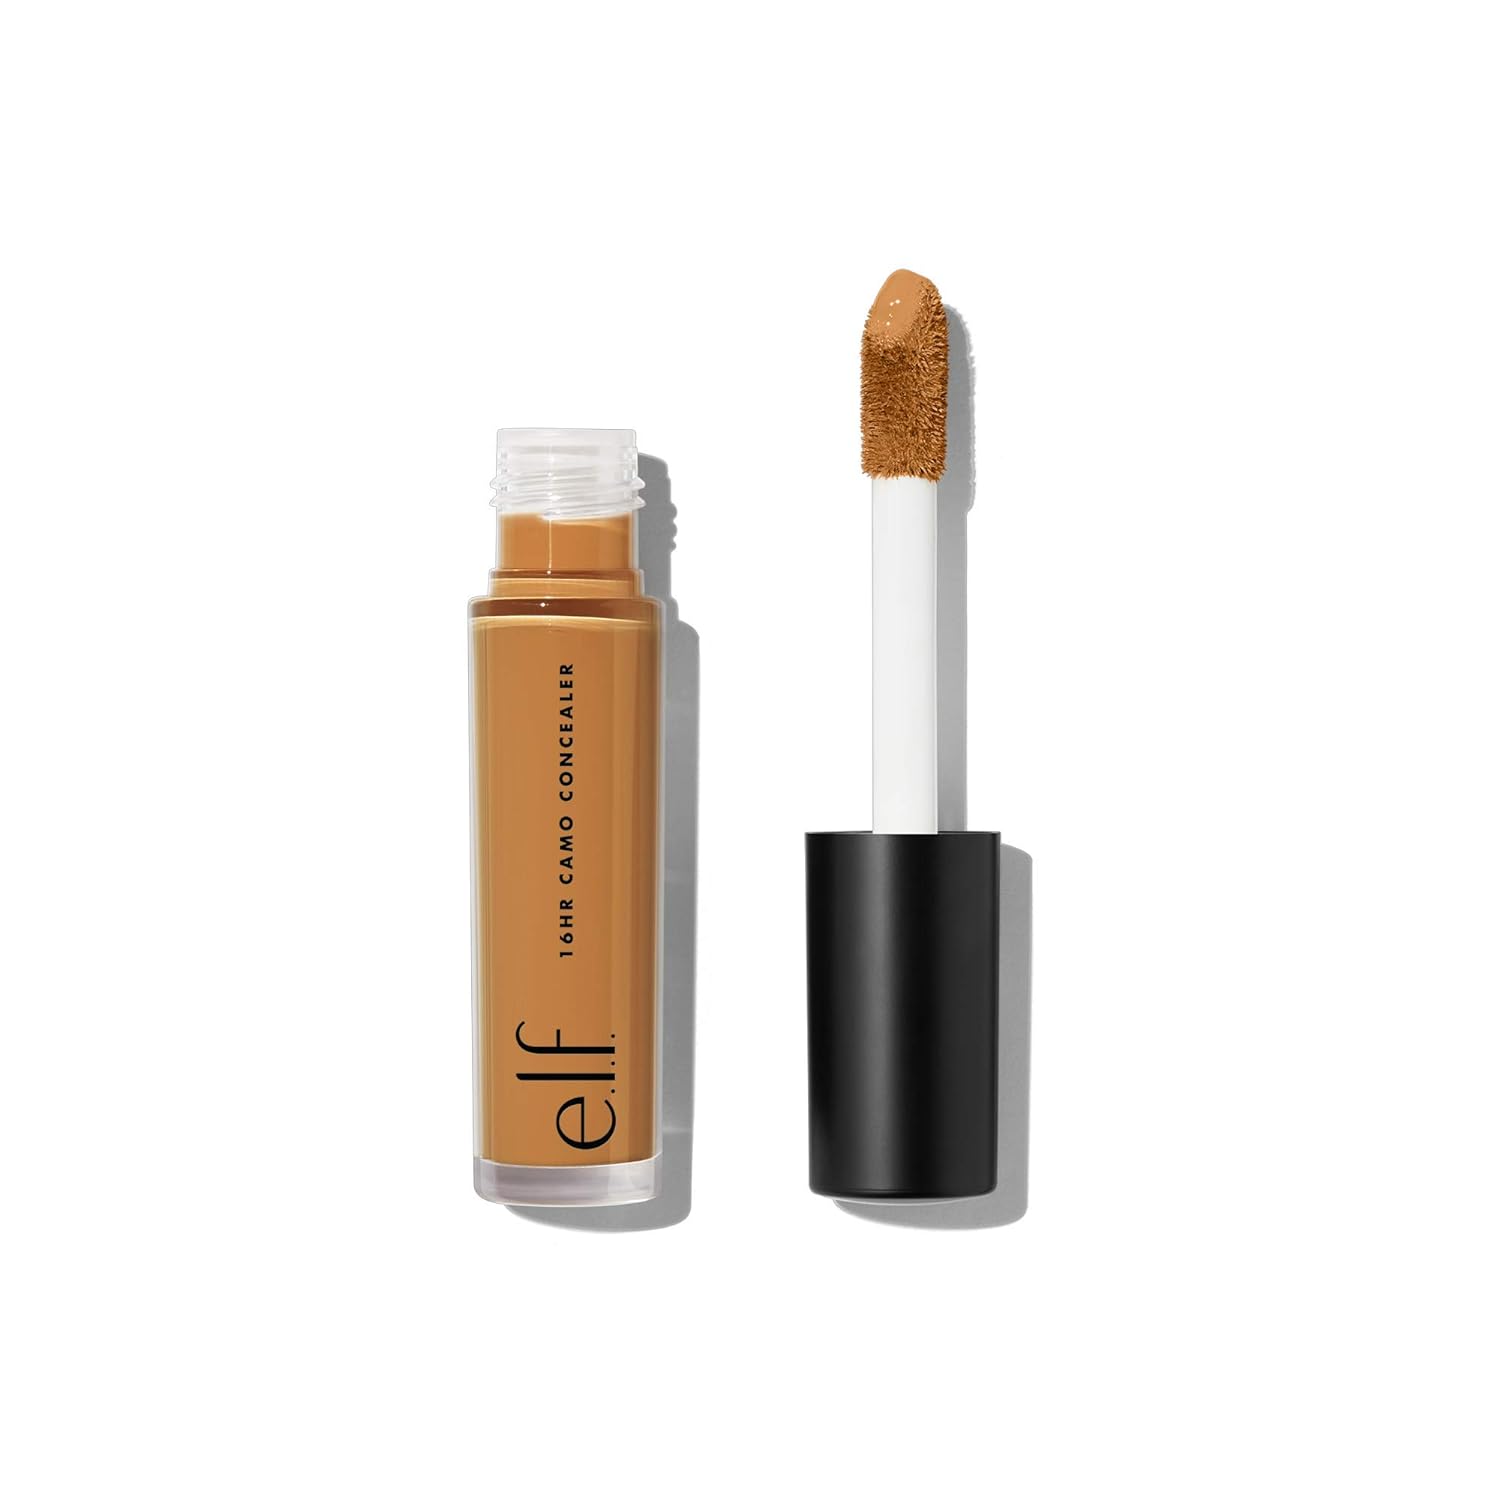 e.l.f. 16HR Camo Concealer, Full Coverage, Highly Pigmented Concealer With Matte Finish, Crease-proof, Vegan & Cruelty-Free, Deep Chestnut, 0.203